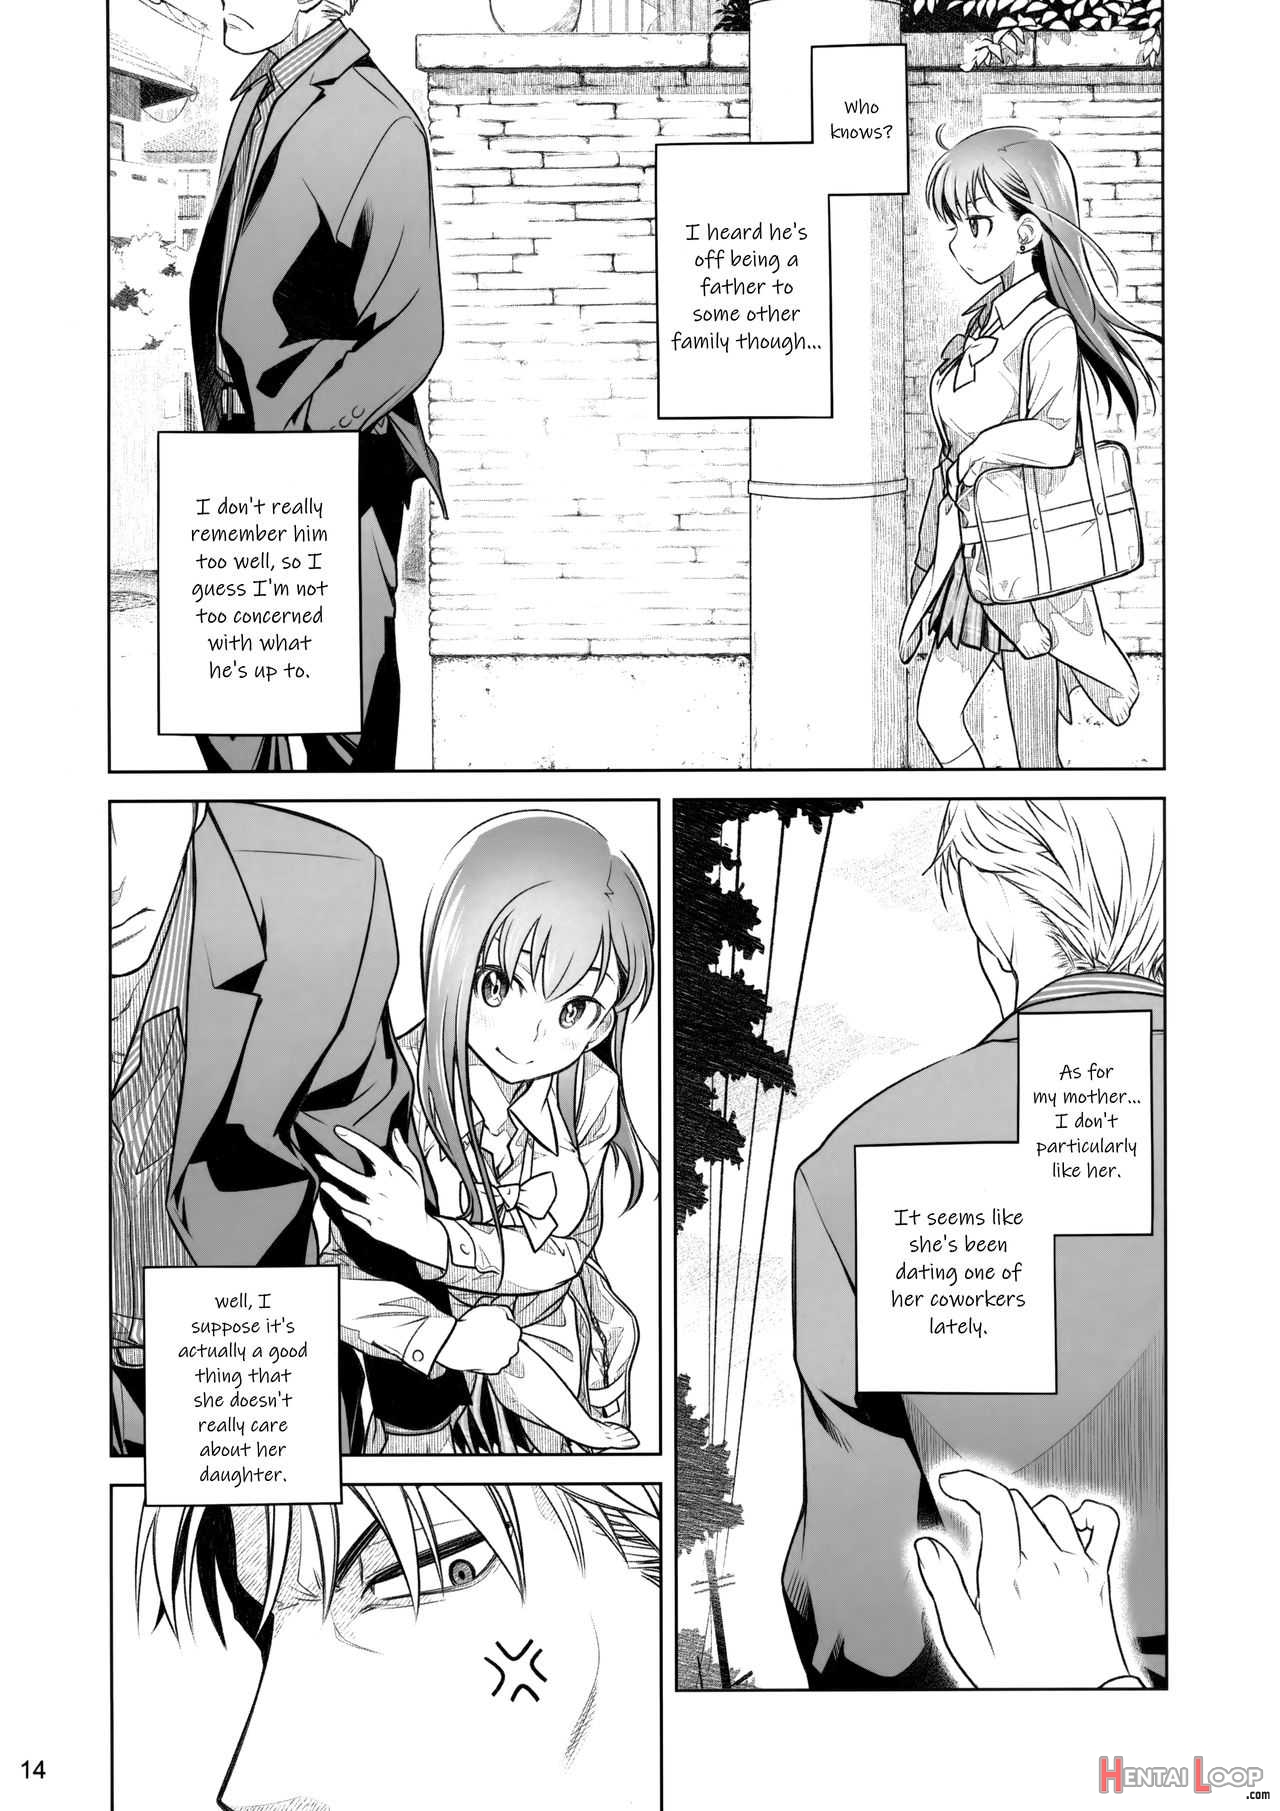 Stay By Me Zenjitsutan Fragile S - Stay By Me "prequel" page 13